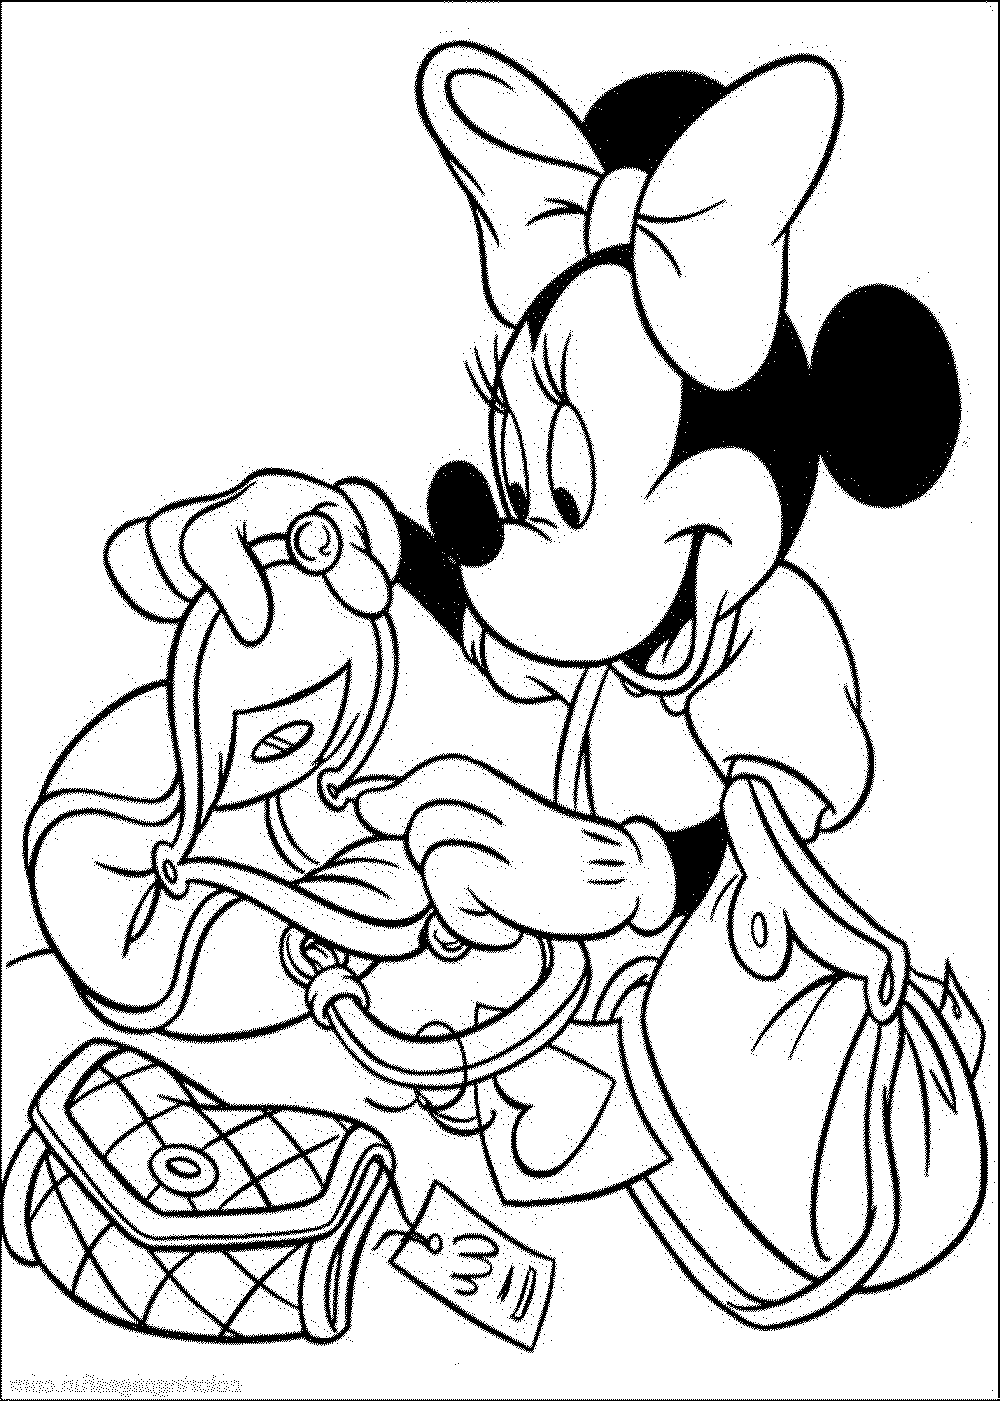 Print & Download Free Minnie Mouse Coloring Pages